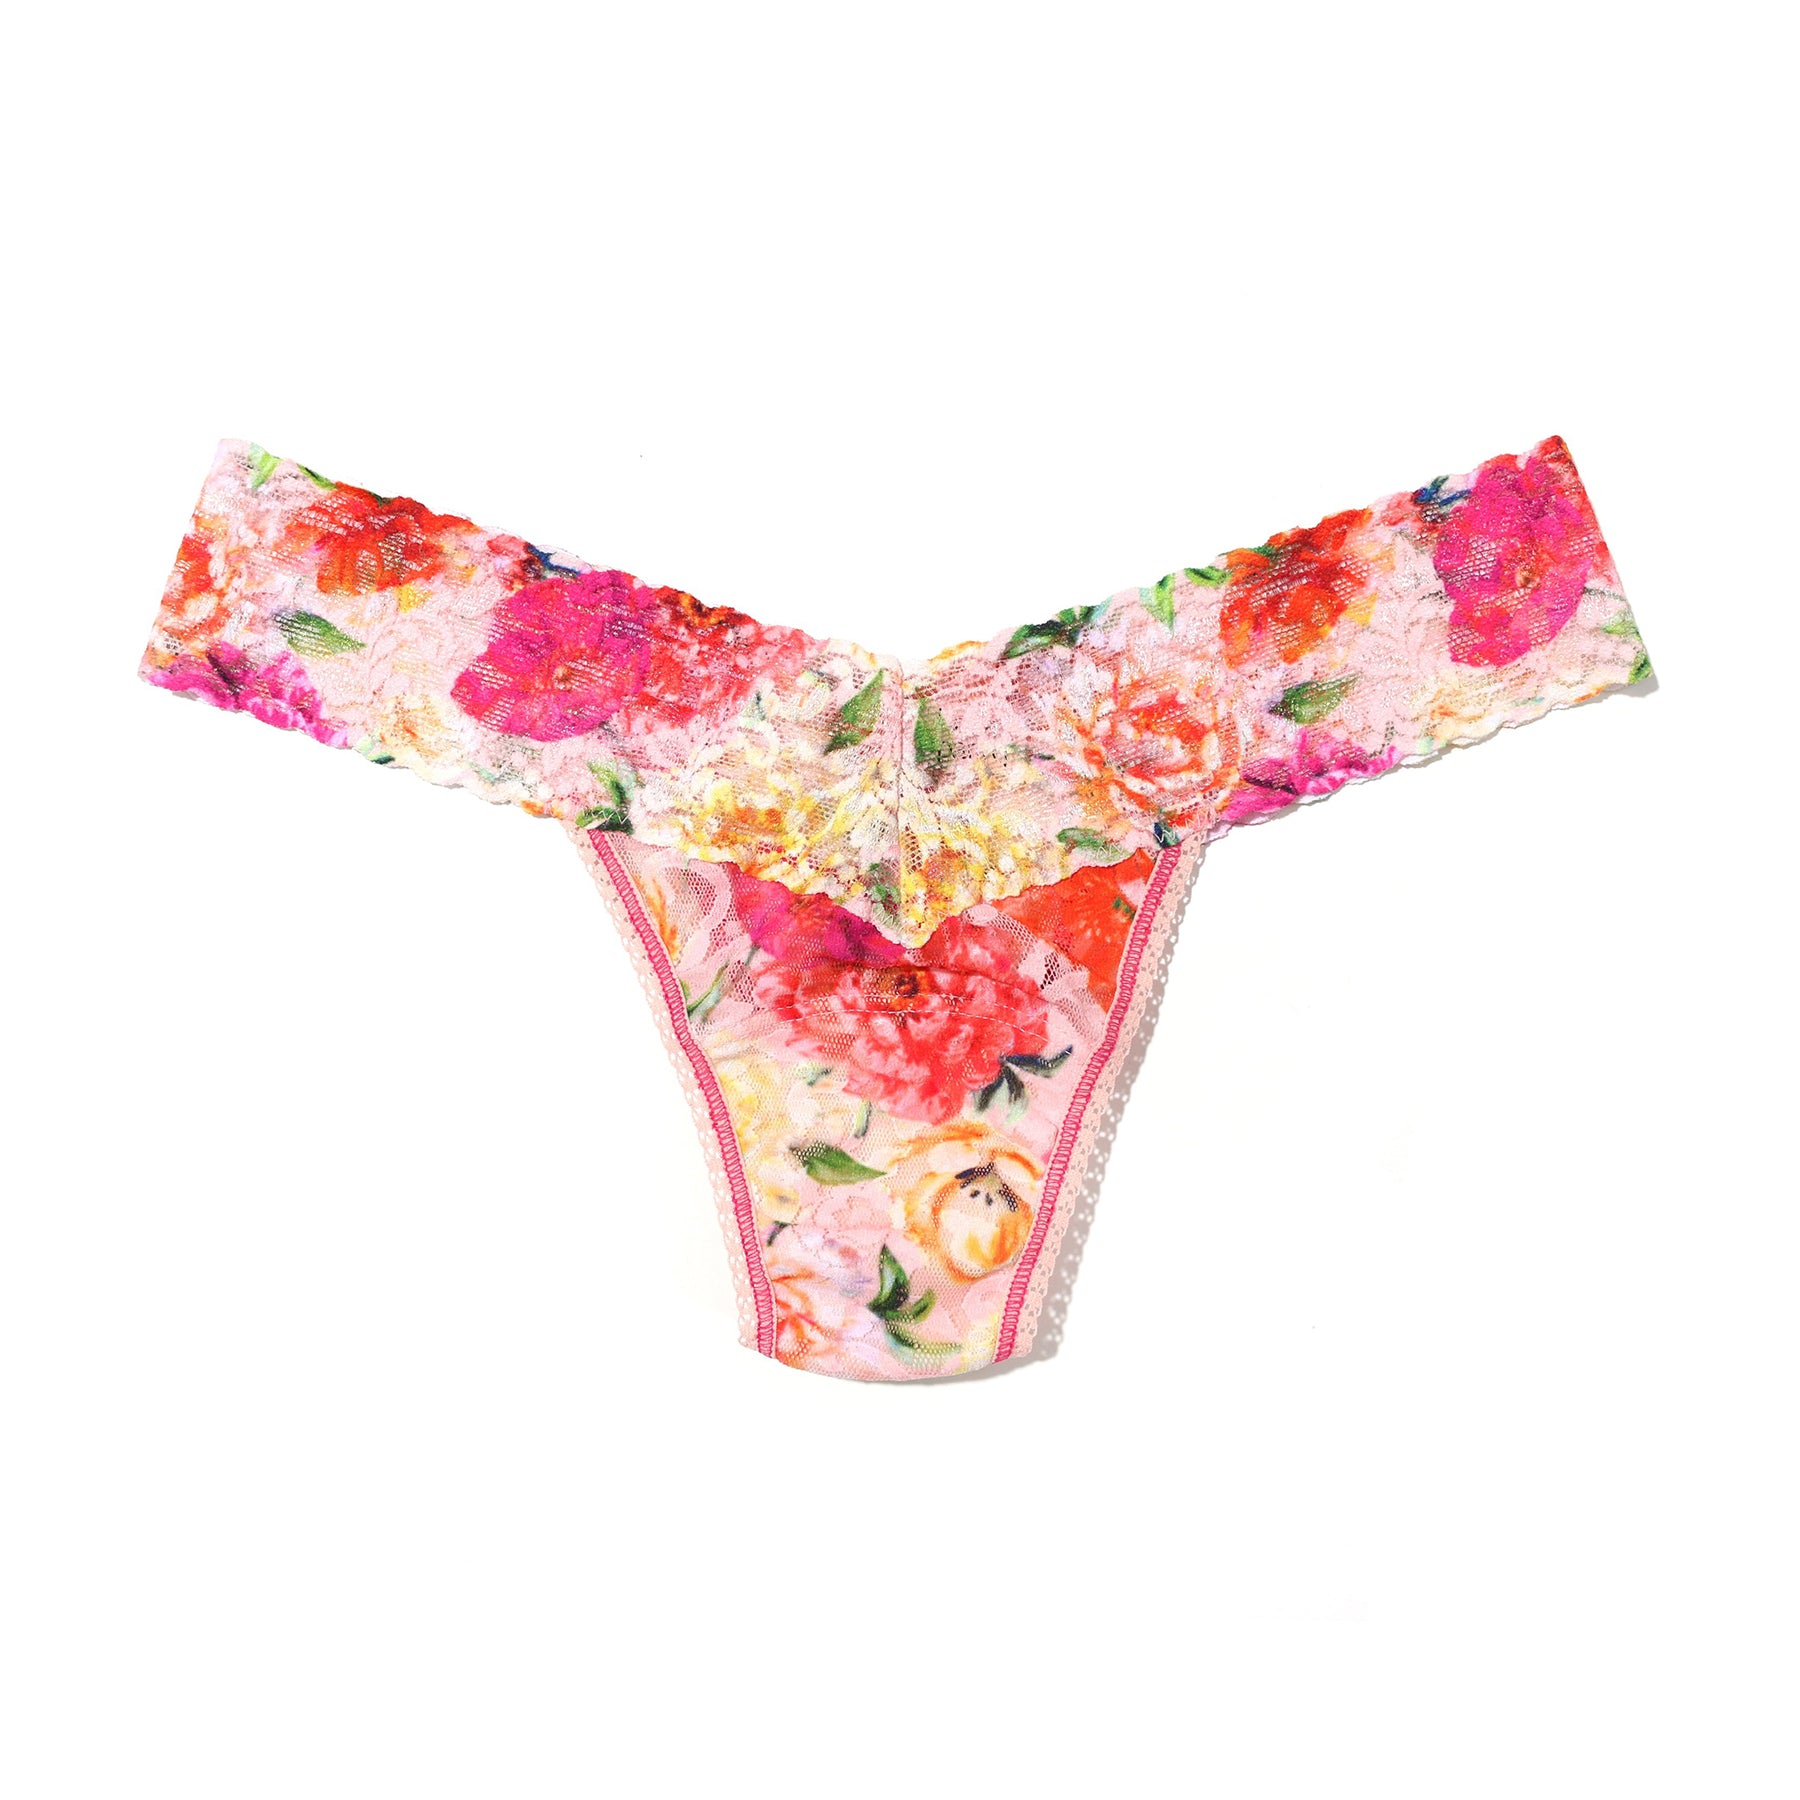 Amoena 44733 Floral Chic Hipster Panty (FINAL SALE)